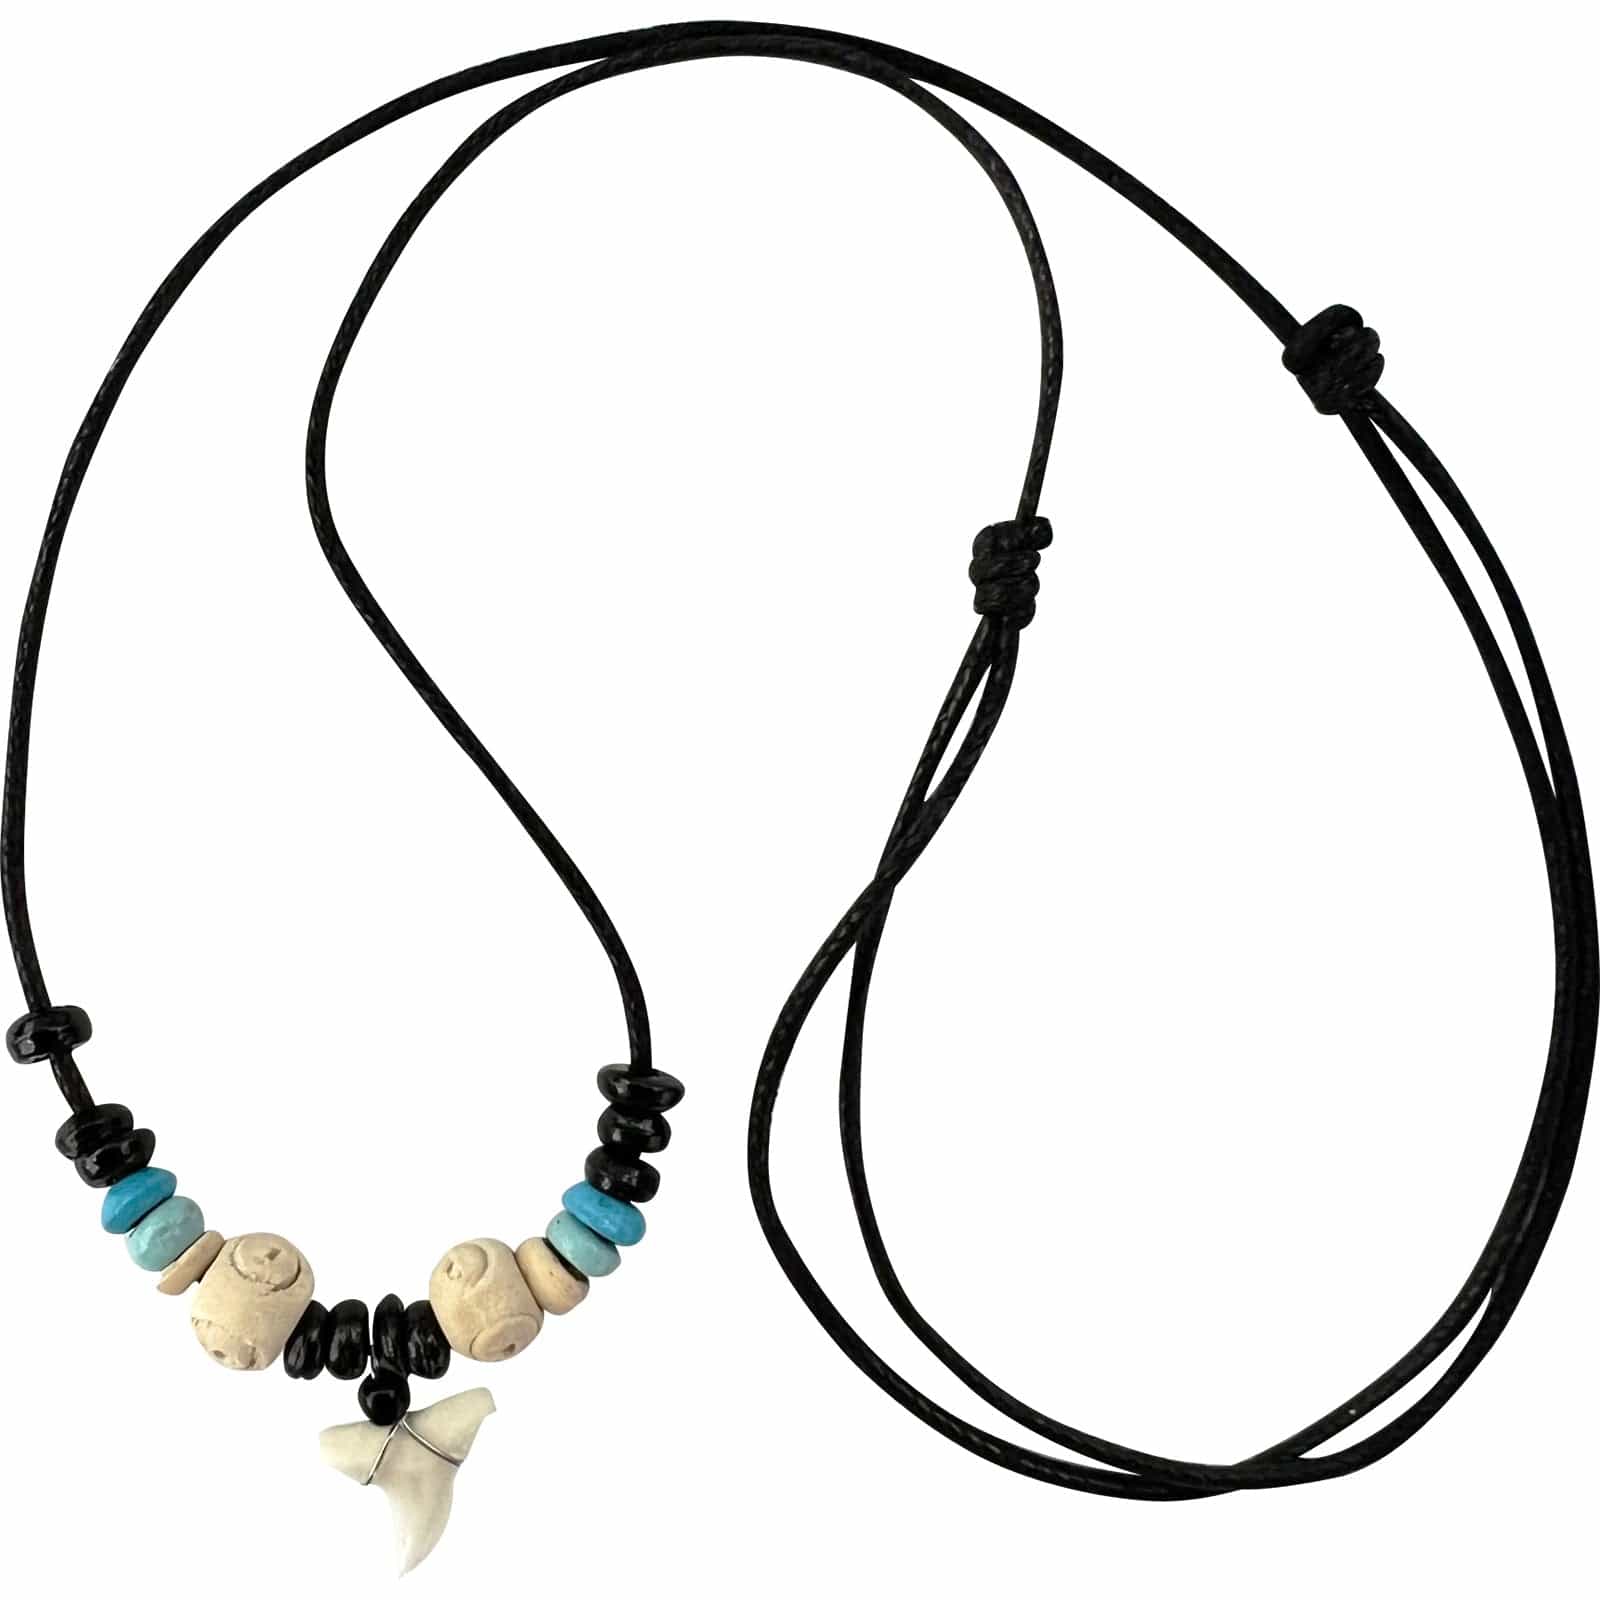 Imitation Resin Shark Tooth Pendant Necklace Wood Beads Cord Chain Mens Womens Costume Jewellery